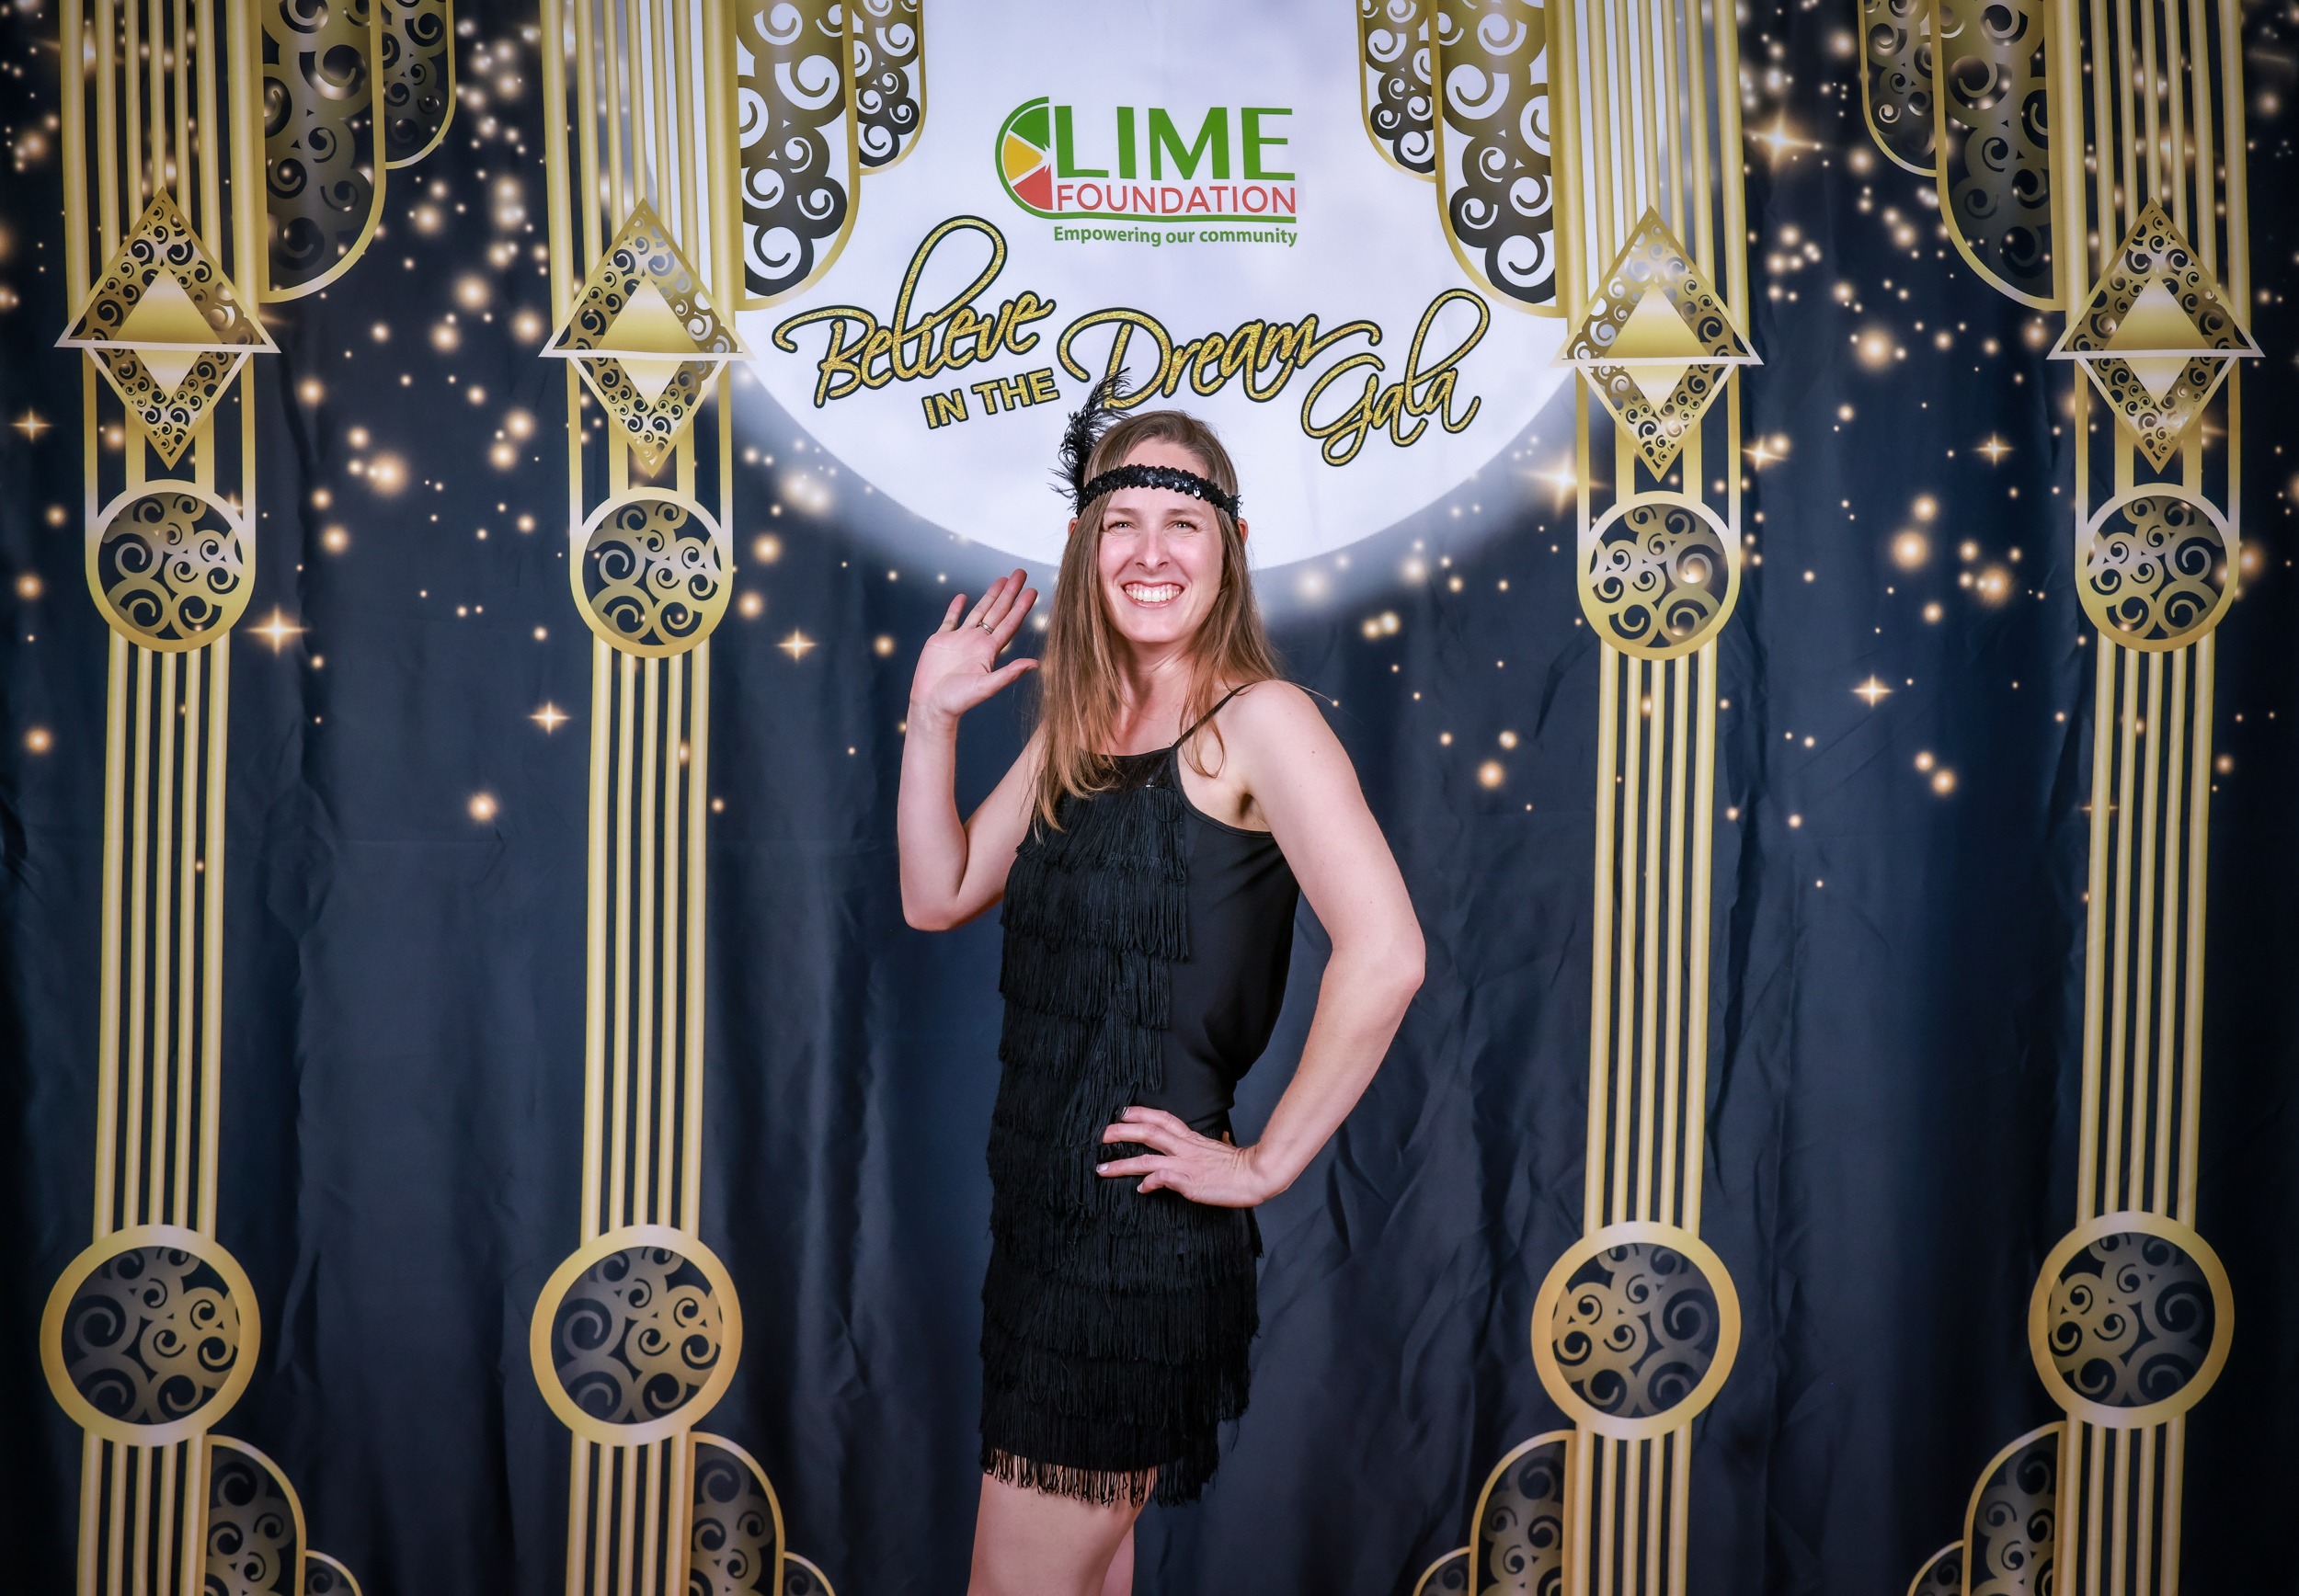 A woman is posing for a photo in front of a gilded backdrop at The LIME Foundation of Santa Rosa.